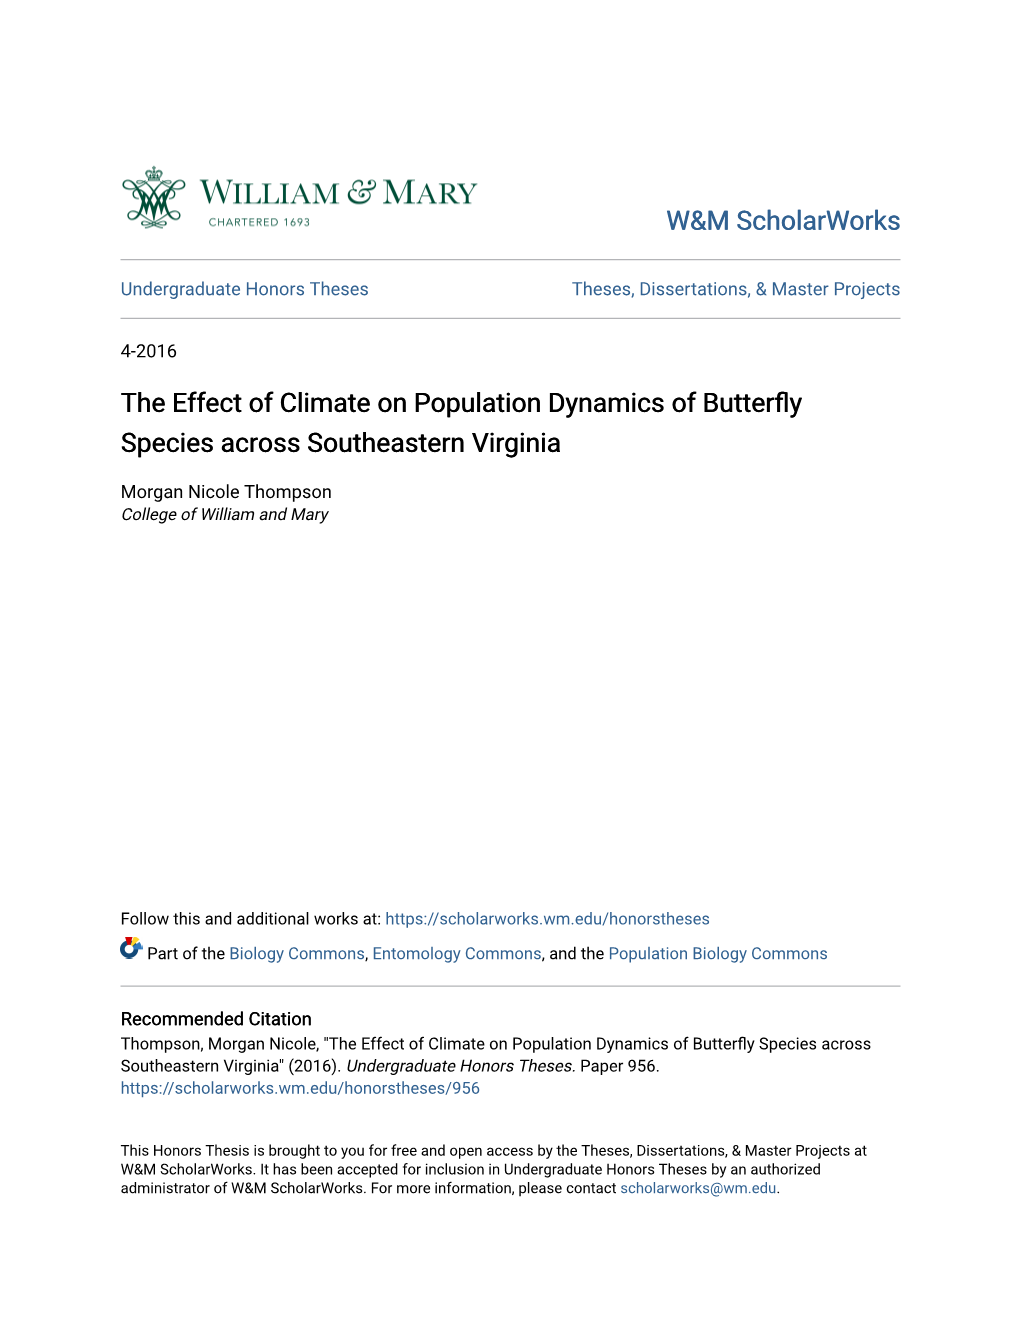 The Effect of Climate on Population Dynamics of Butterfly Species Across Southeastern Virginia